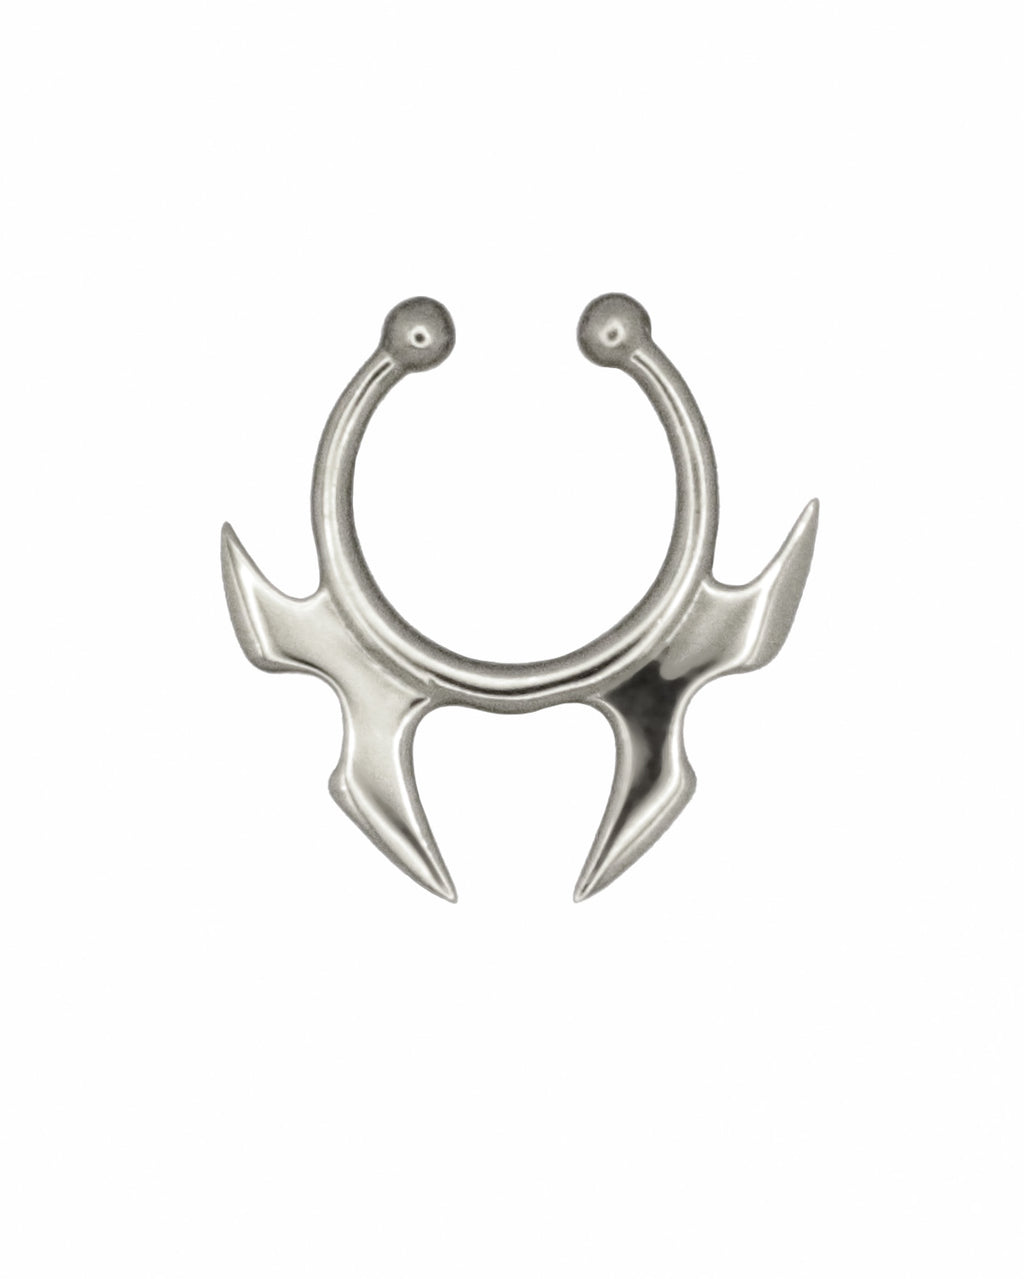 Blade Nose Ring | Austin James Smith Jewelry